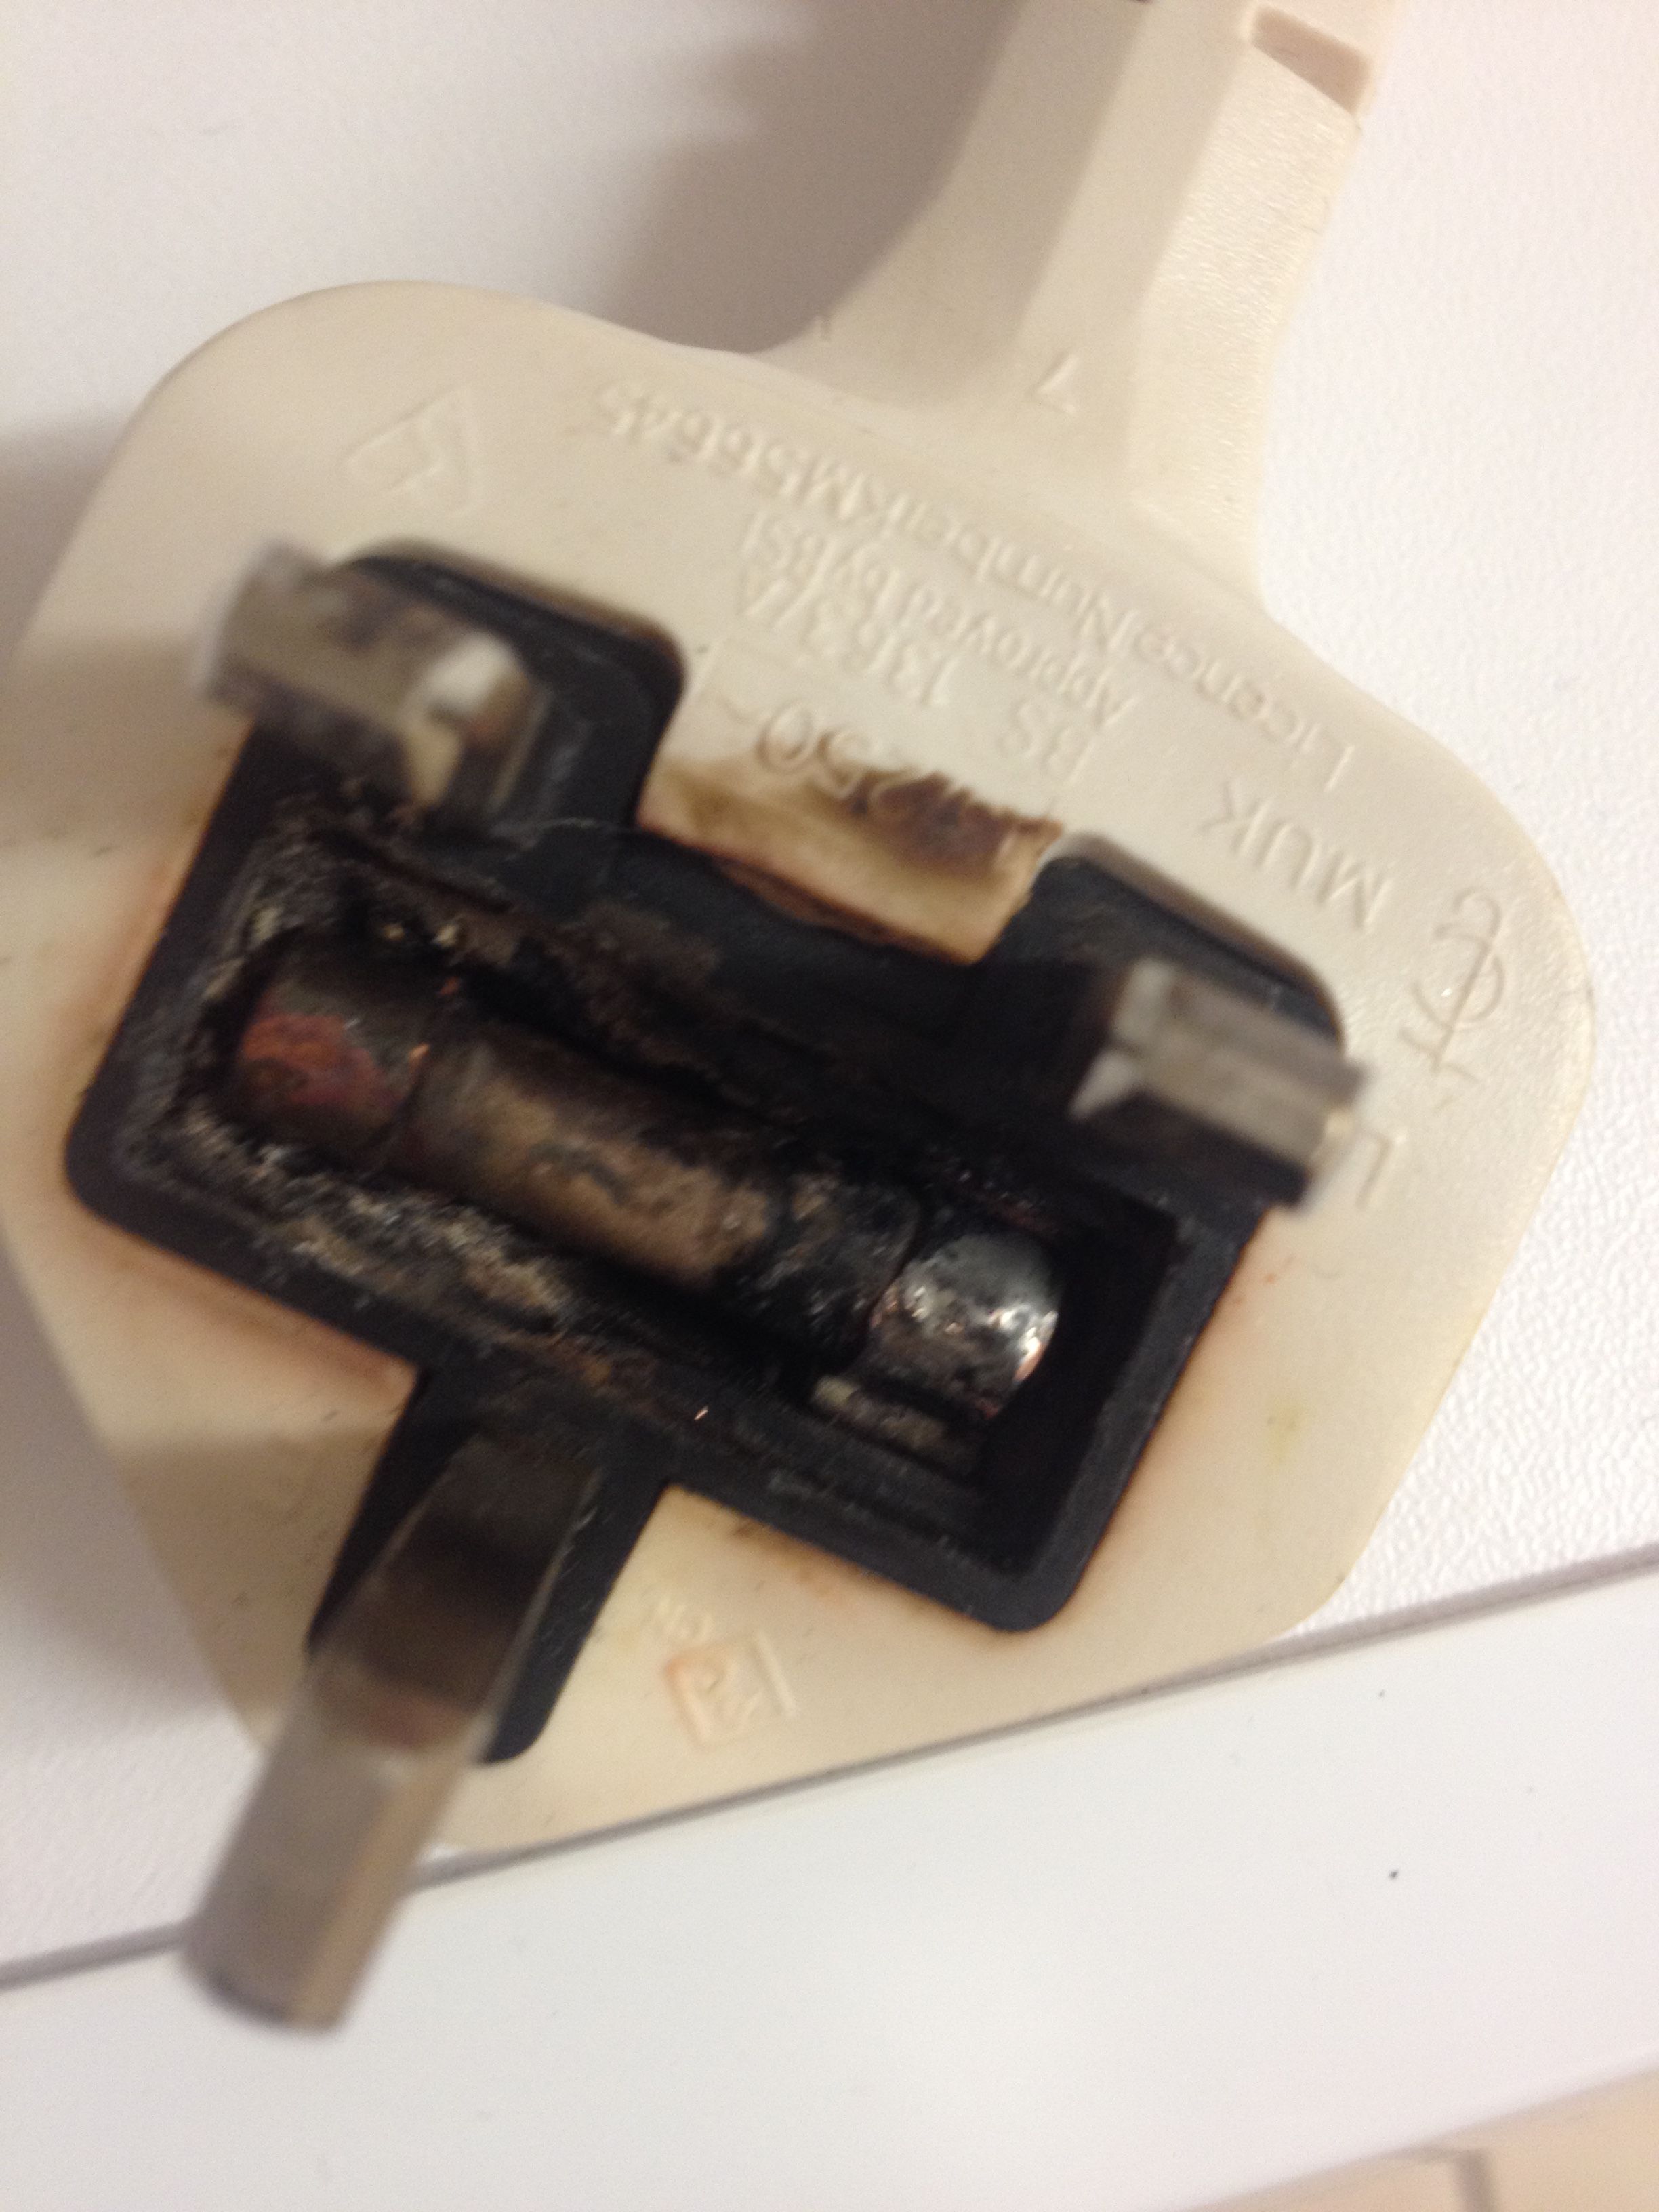 Socket caught on fire - urgent help/advice needed from tenant {filename} | ElectriciansForums.net